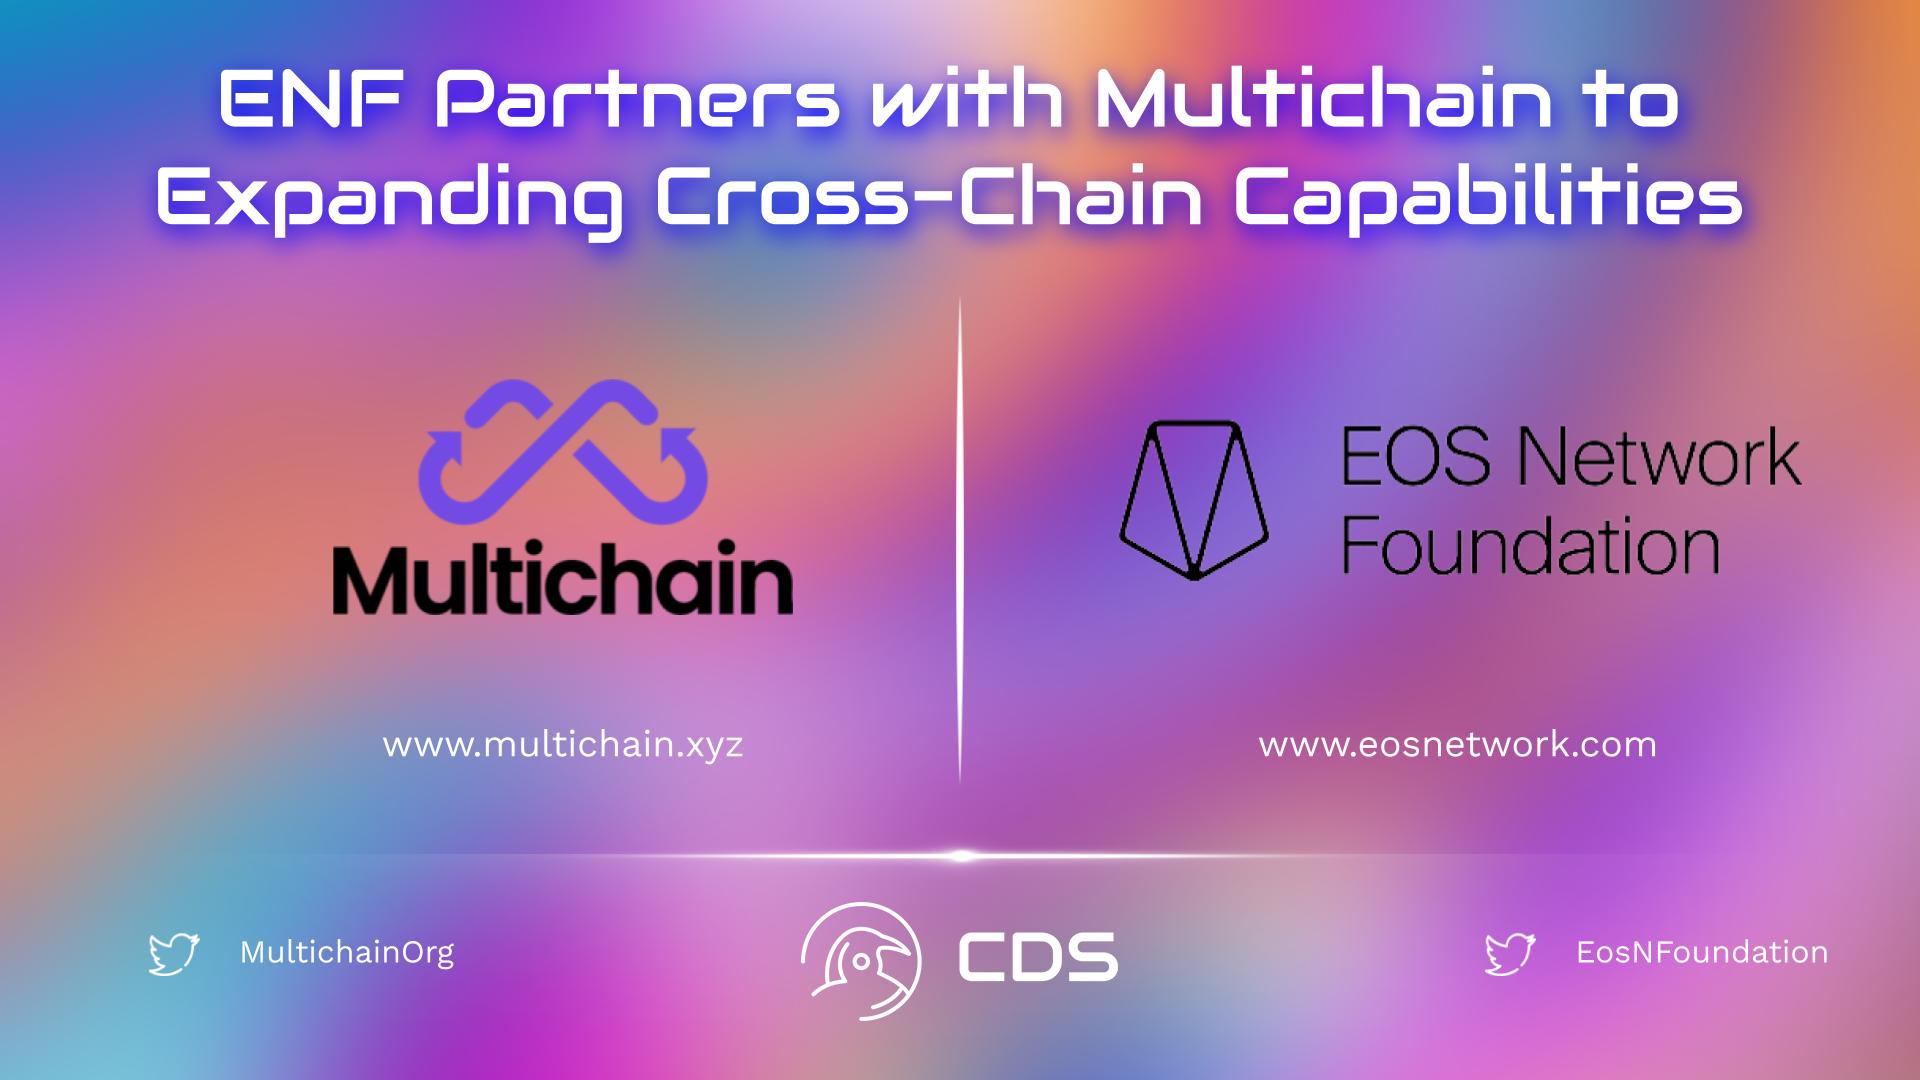 ENF Partners with Multichain to Expanding Cross-Chain Capabilities